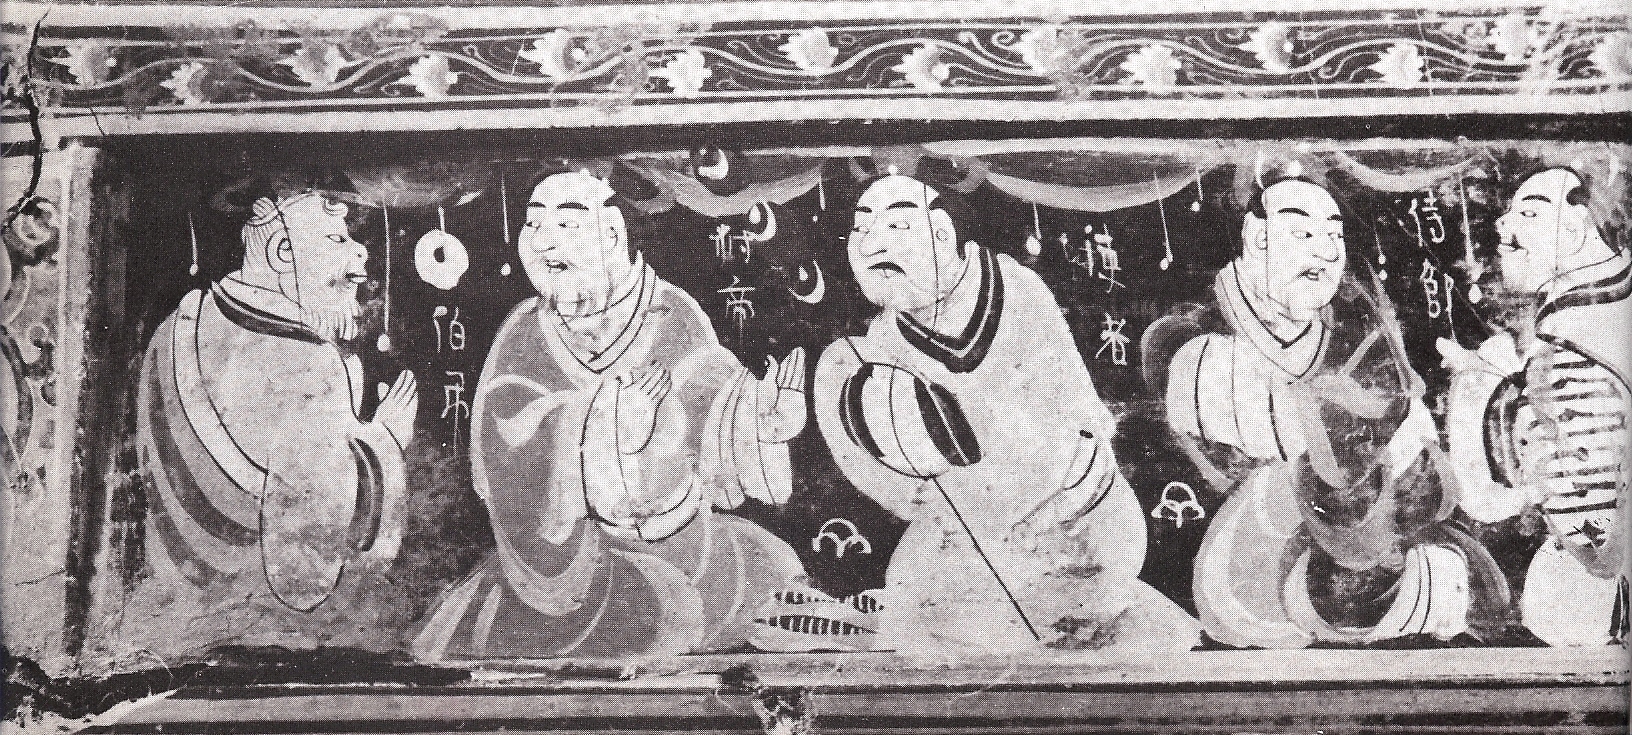 Painted_figures_on_a_lacquer_basket,_Eastern_Han_Dynasty2.jpg